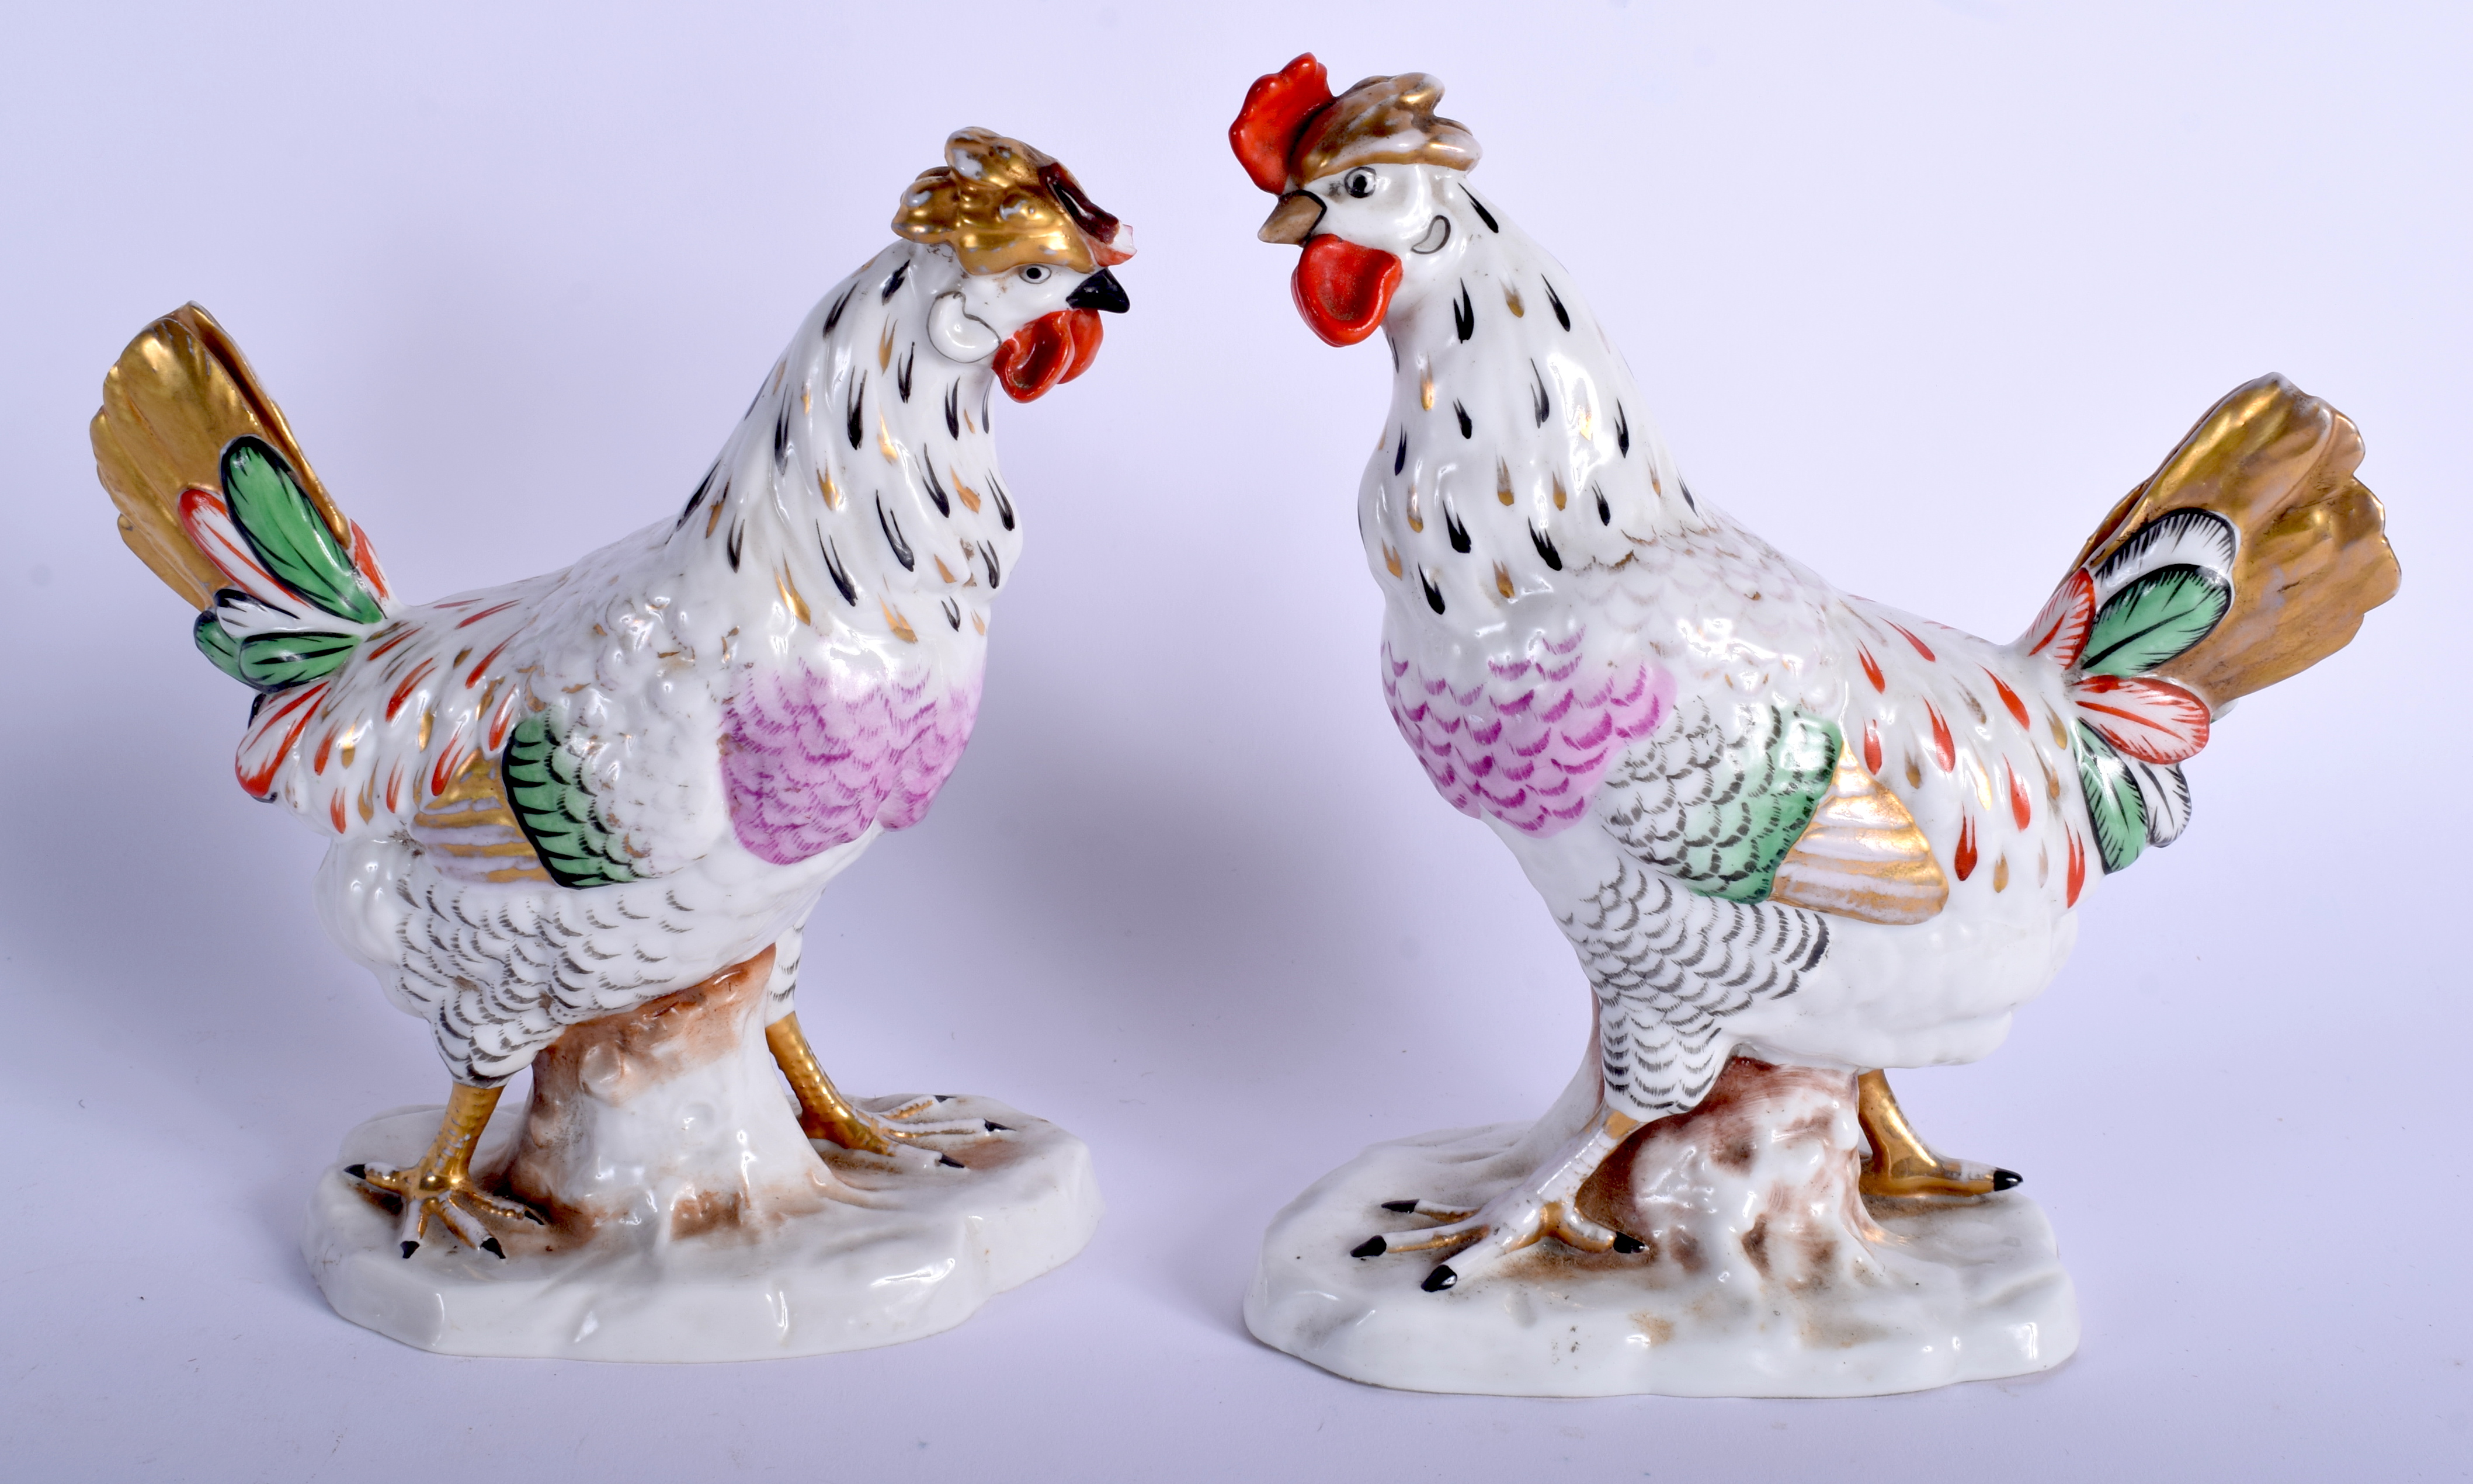 A PAIR OF EARLY 20TH CENTURY GERMAN PORCELAIN BIRDS modelled upon a naturalistic base. 17 cm x 10 c